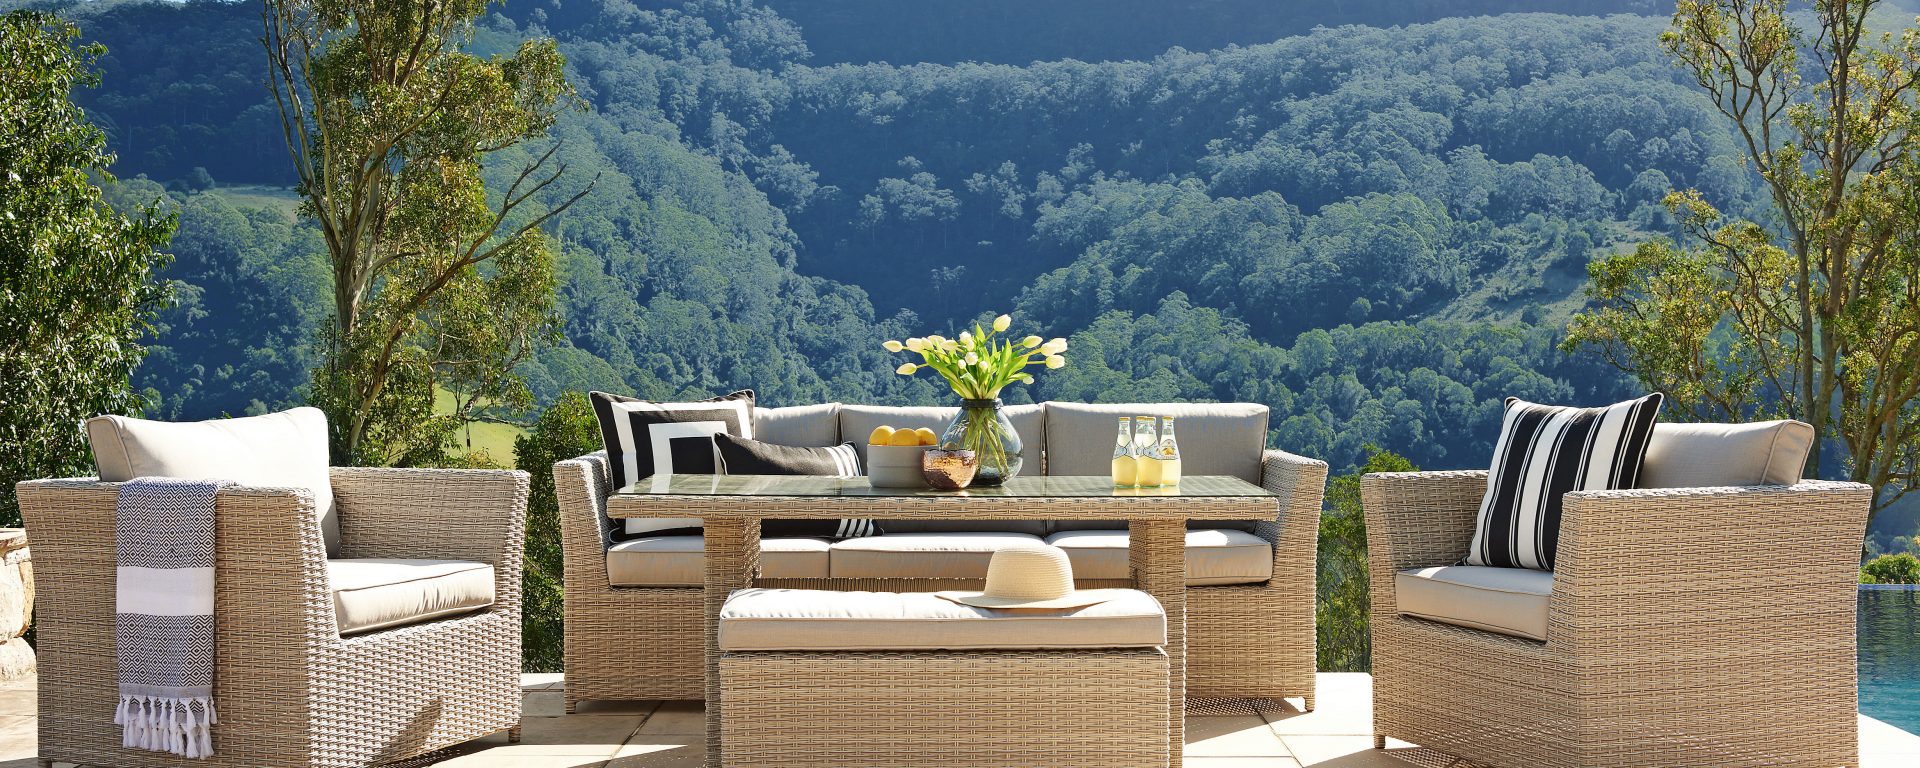 Select Your Dream Outdoor Furniture 4, Funky Outdoor Furniture Australia